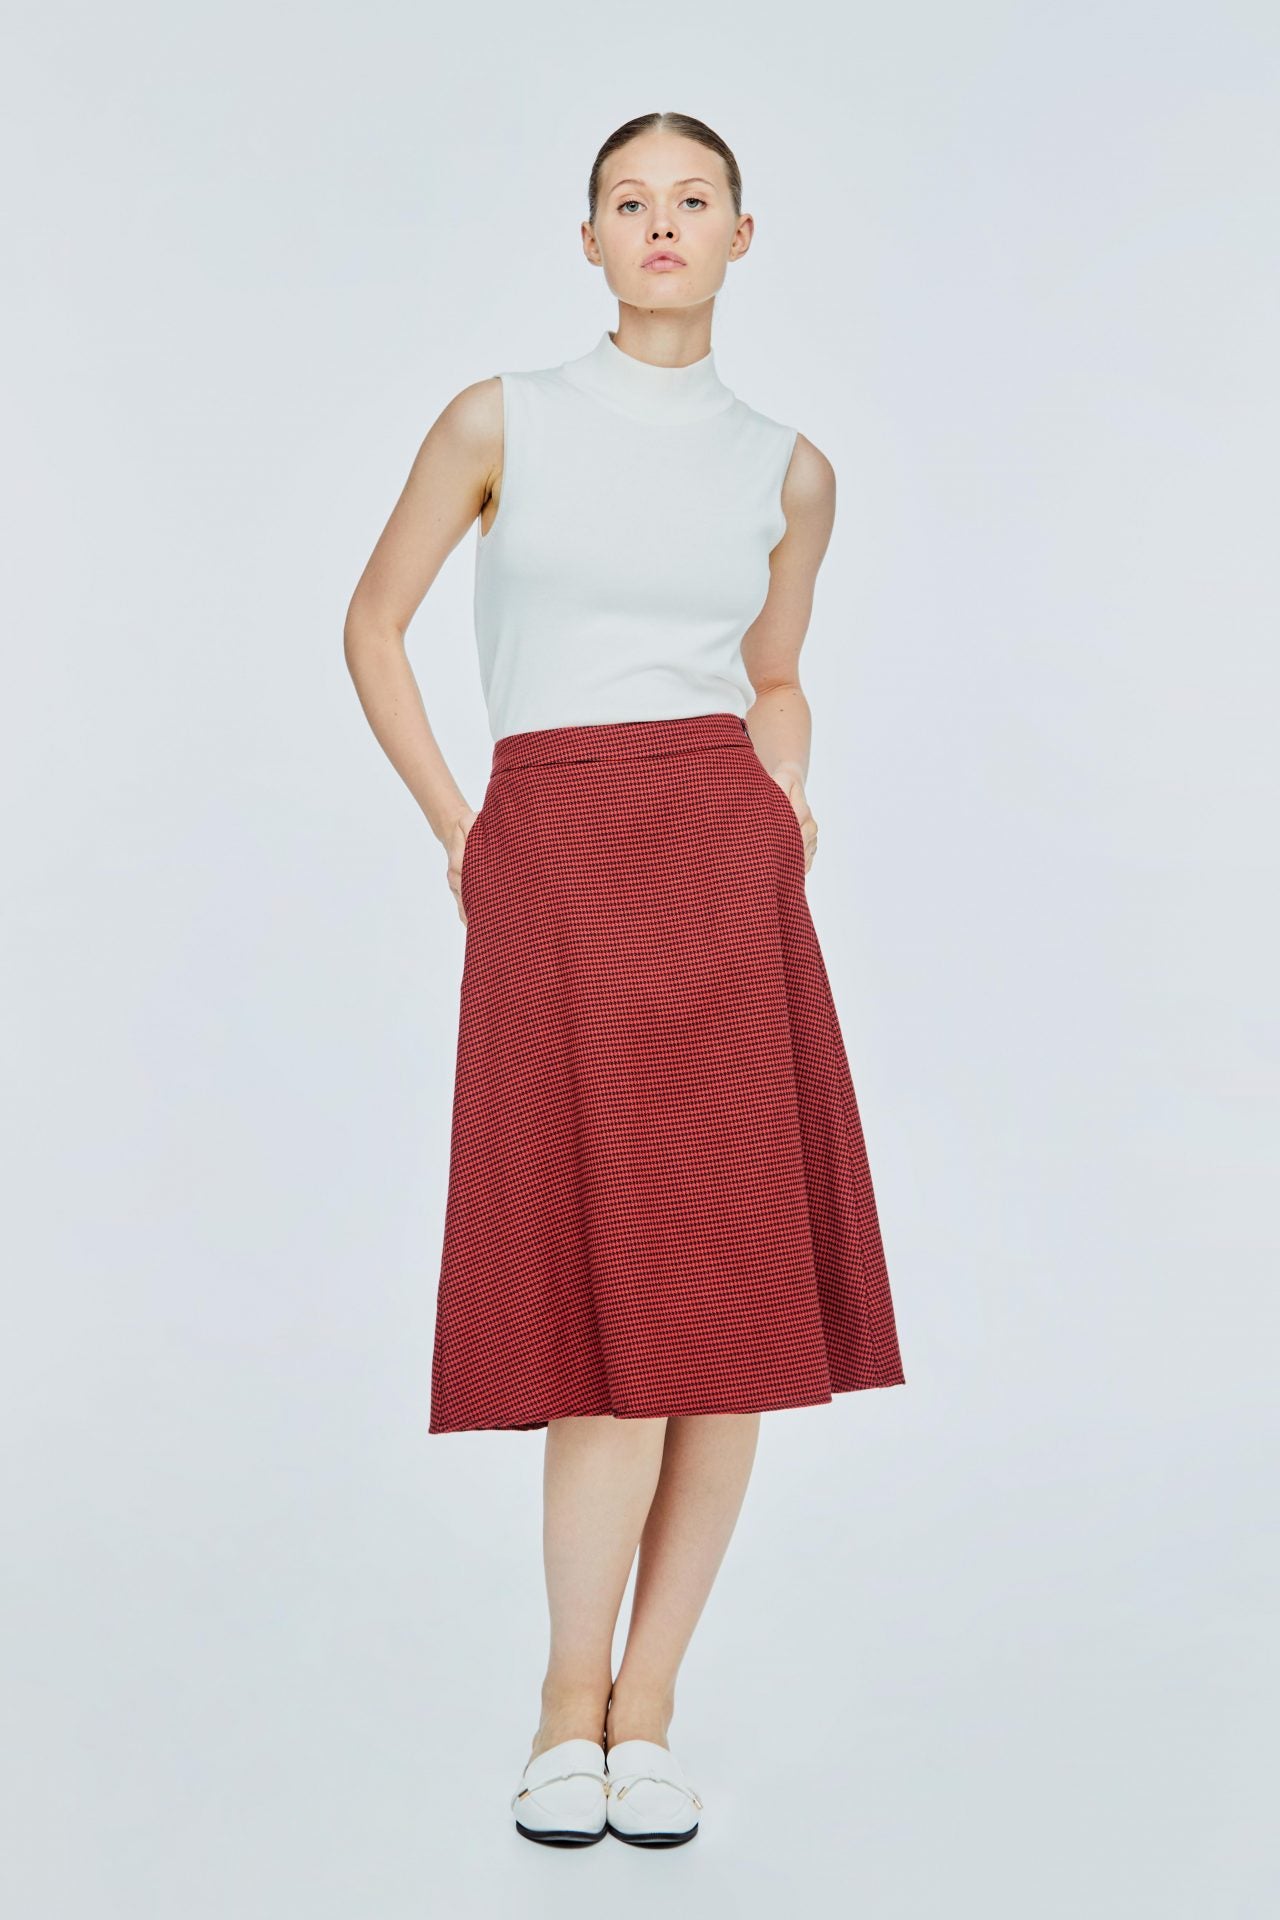 AS 10994 PATTERN A-LINE SKIRT MAROON